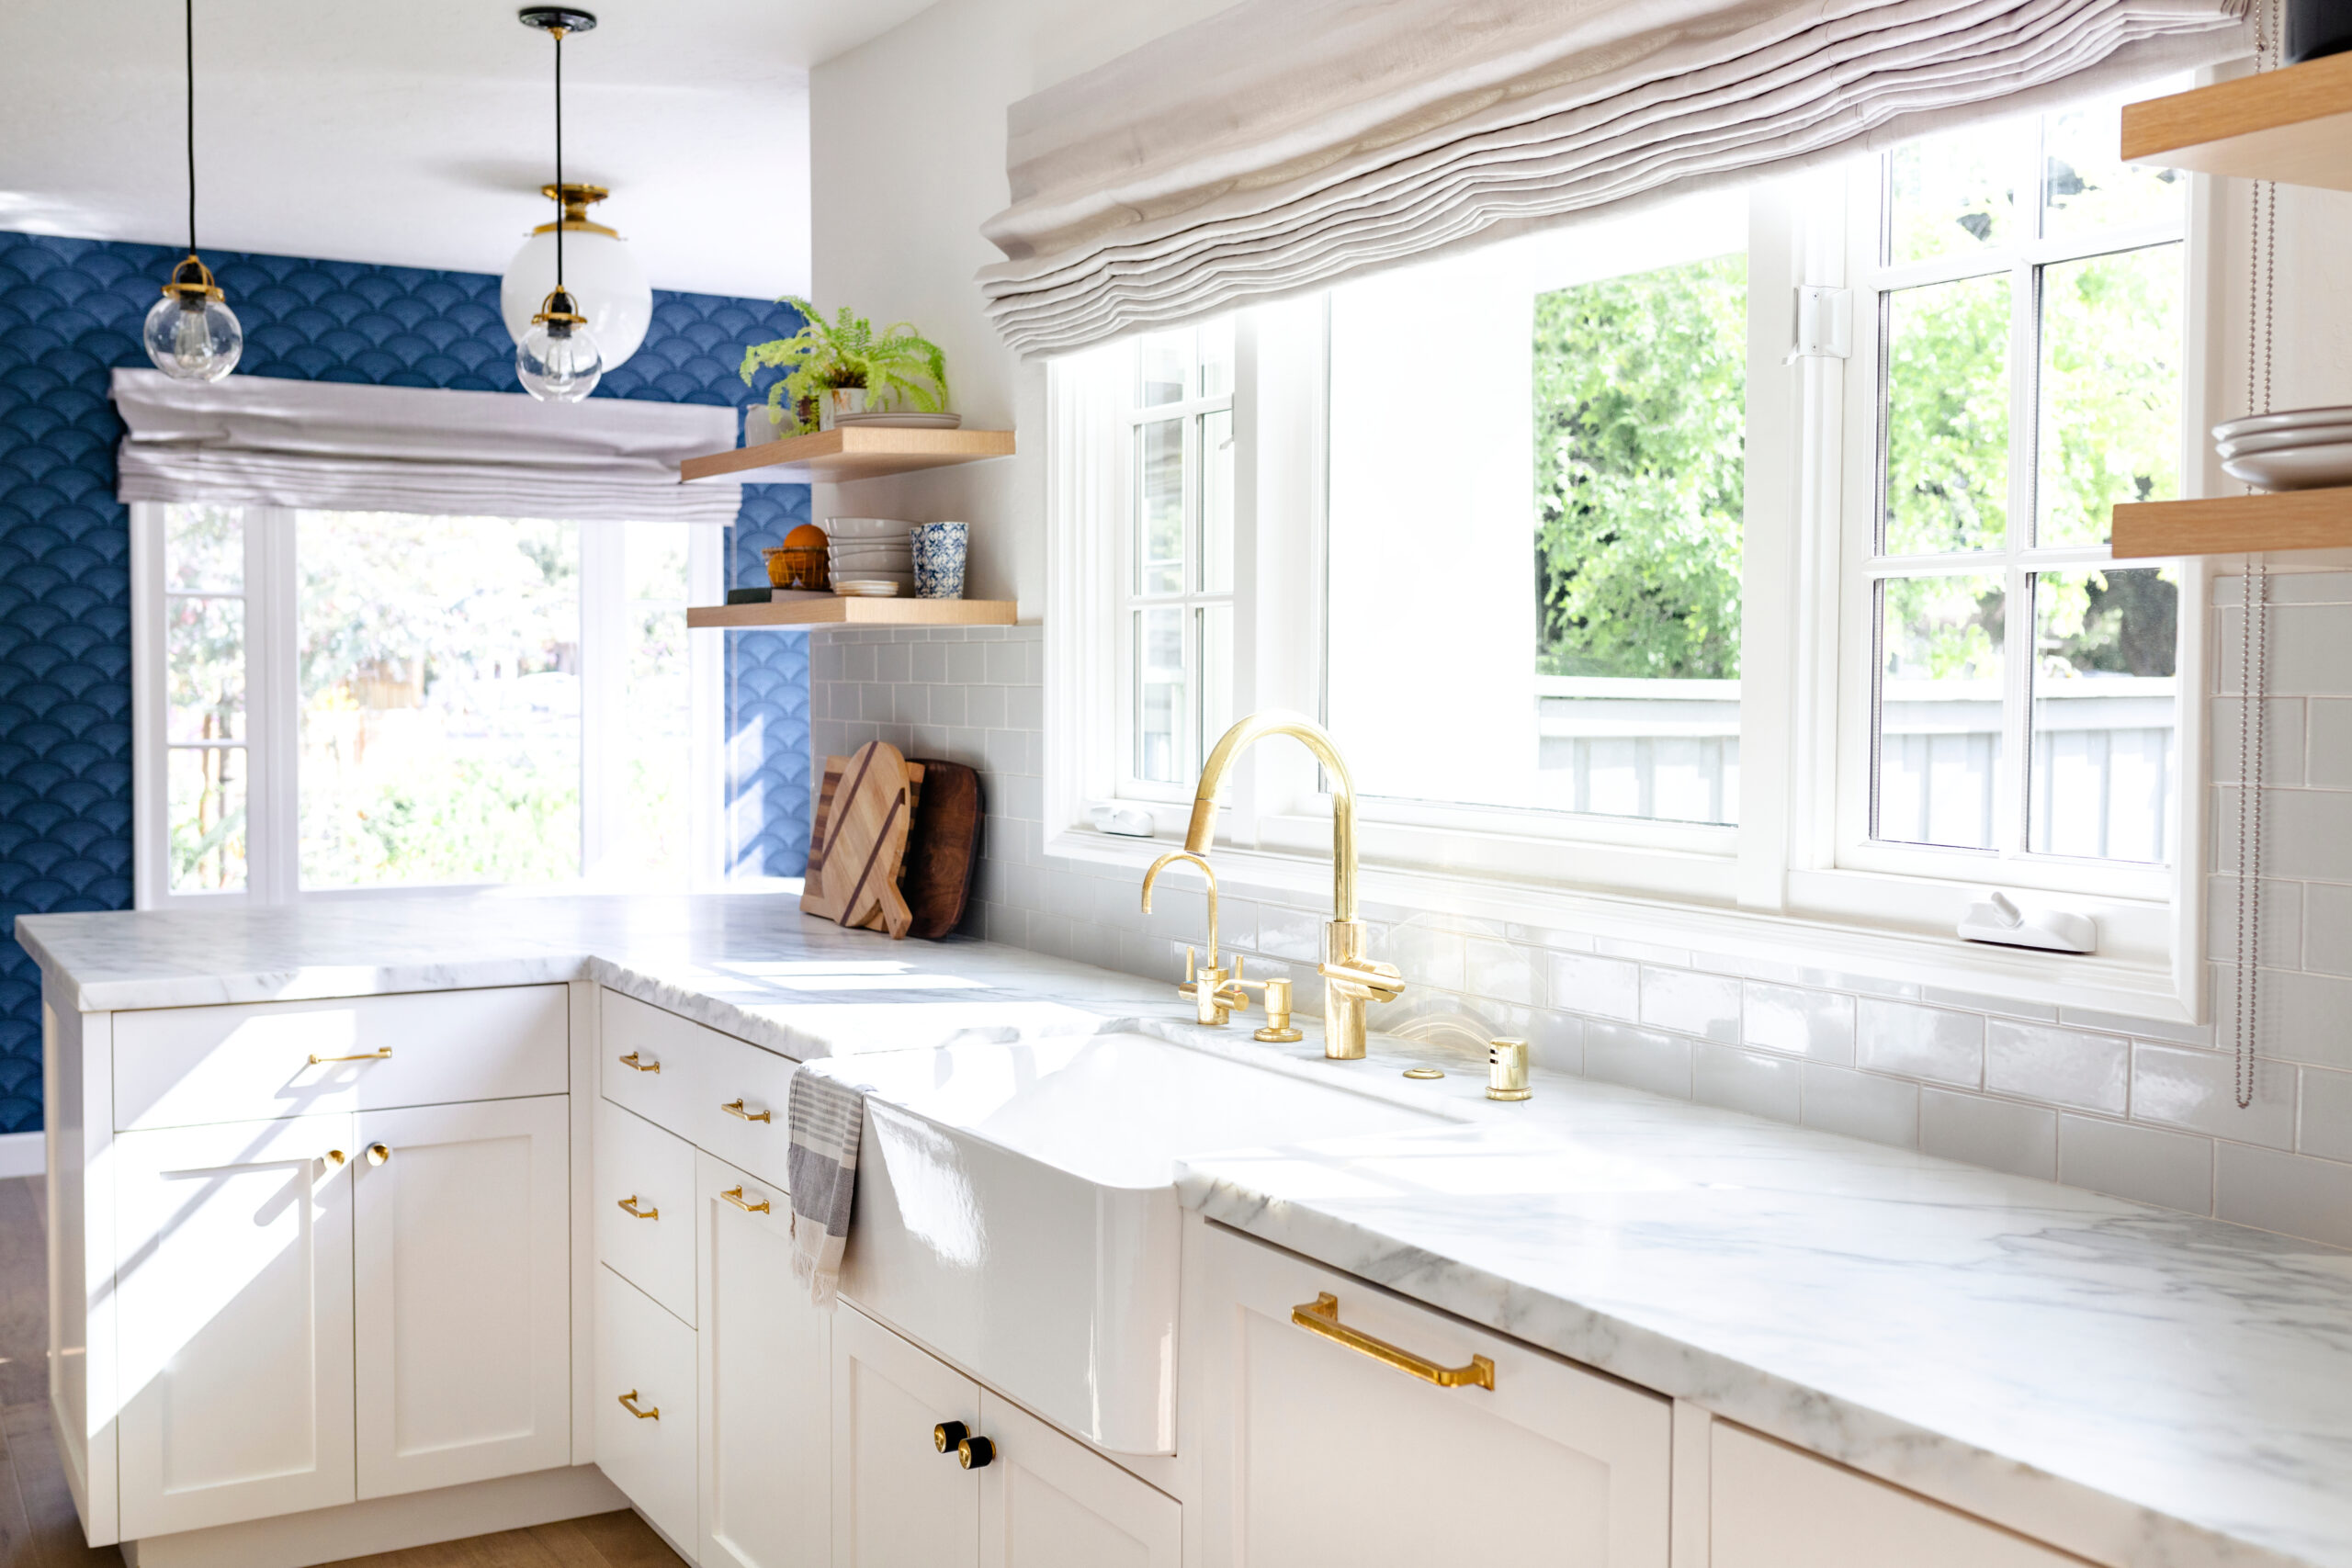 New kitchen windows, countertops gold accents